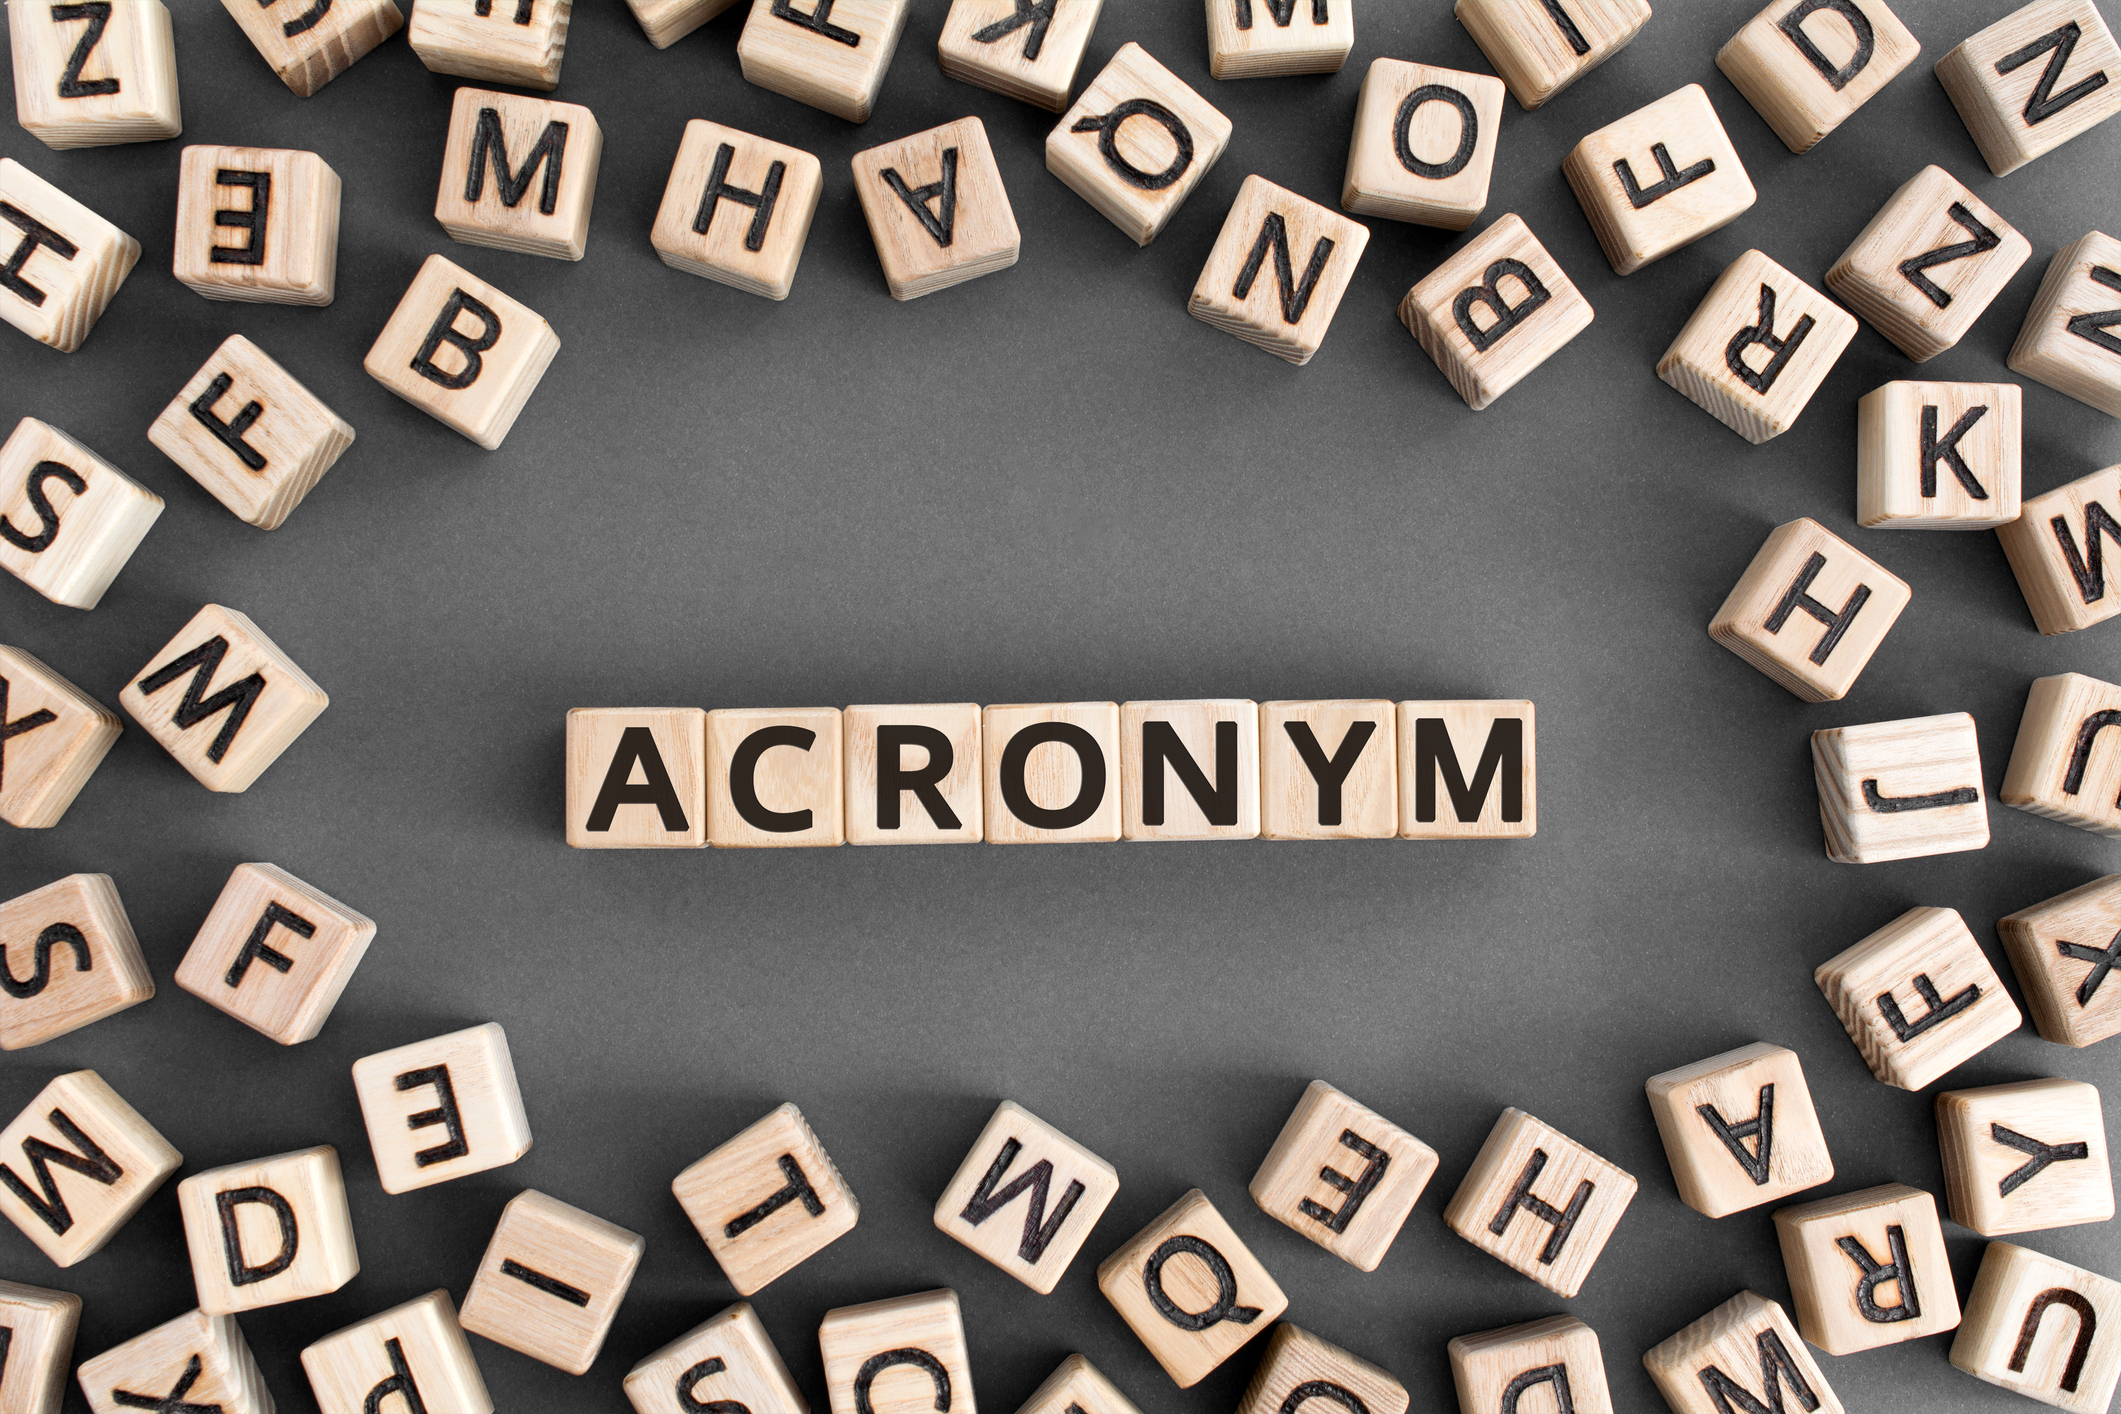 Scrabble tiles spelling out acronym